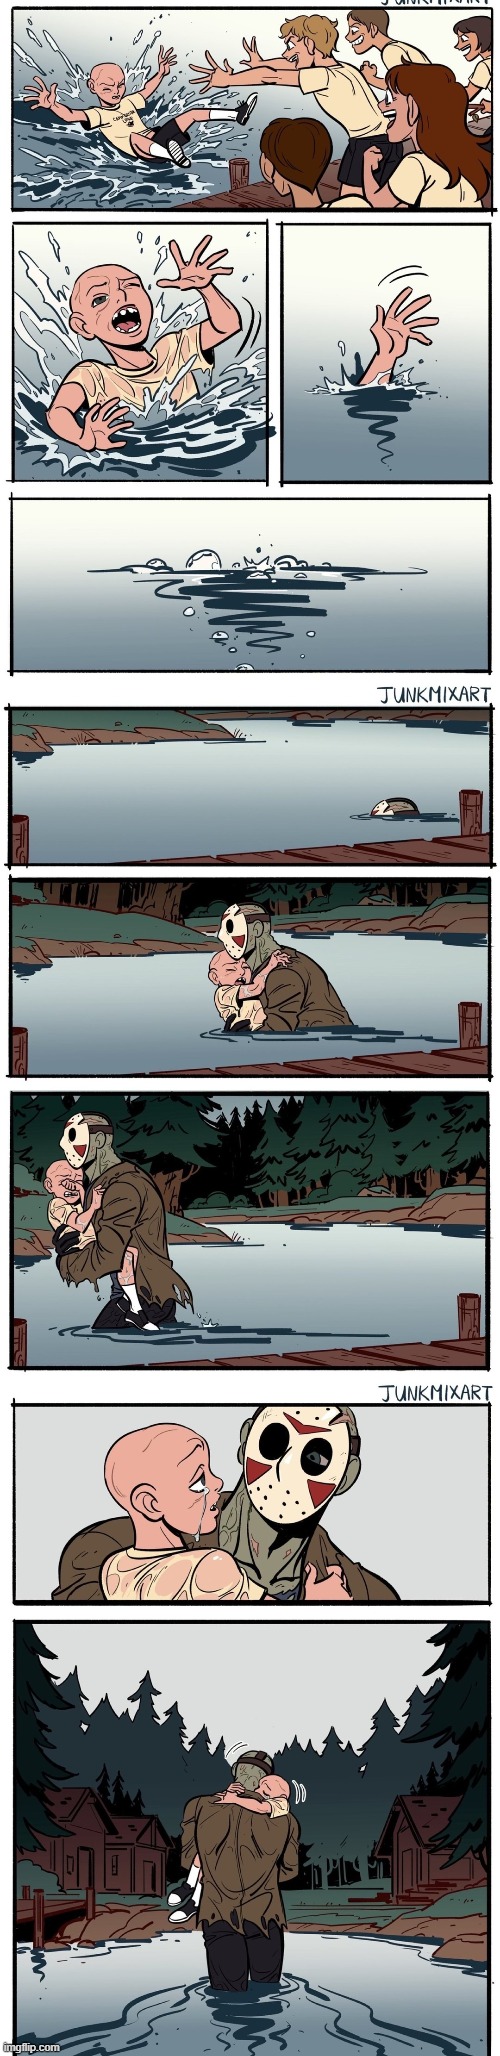 Friday the 13th | image tagged in comics,friday the 13th,jason,wholesome | made w/ Imgflip meme maker